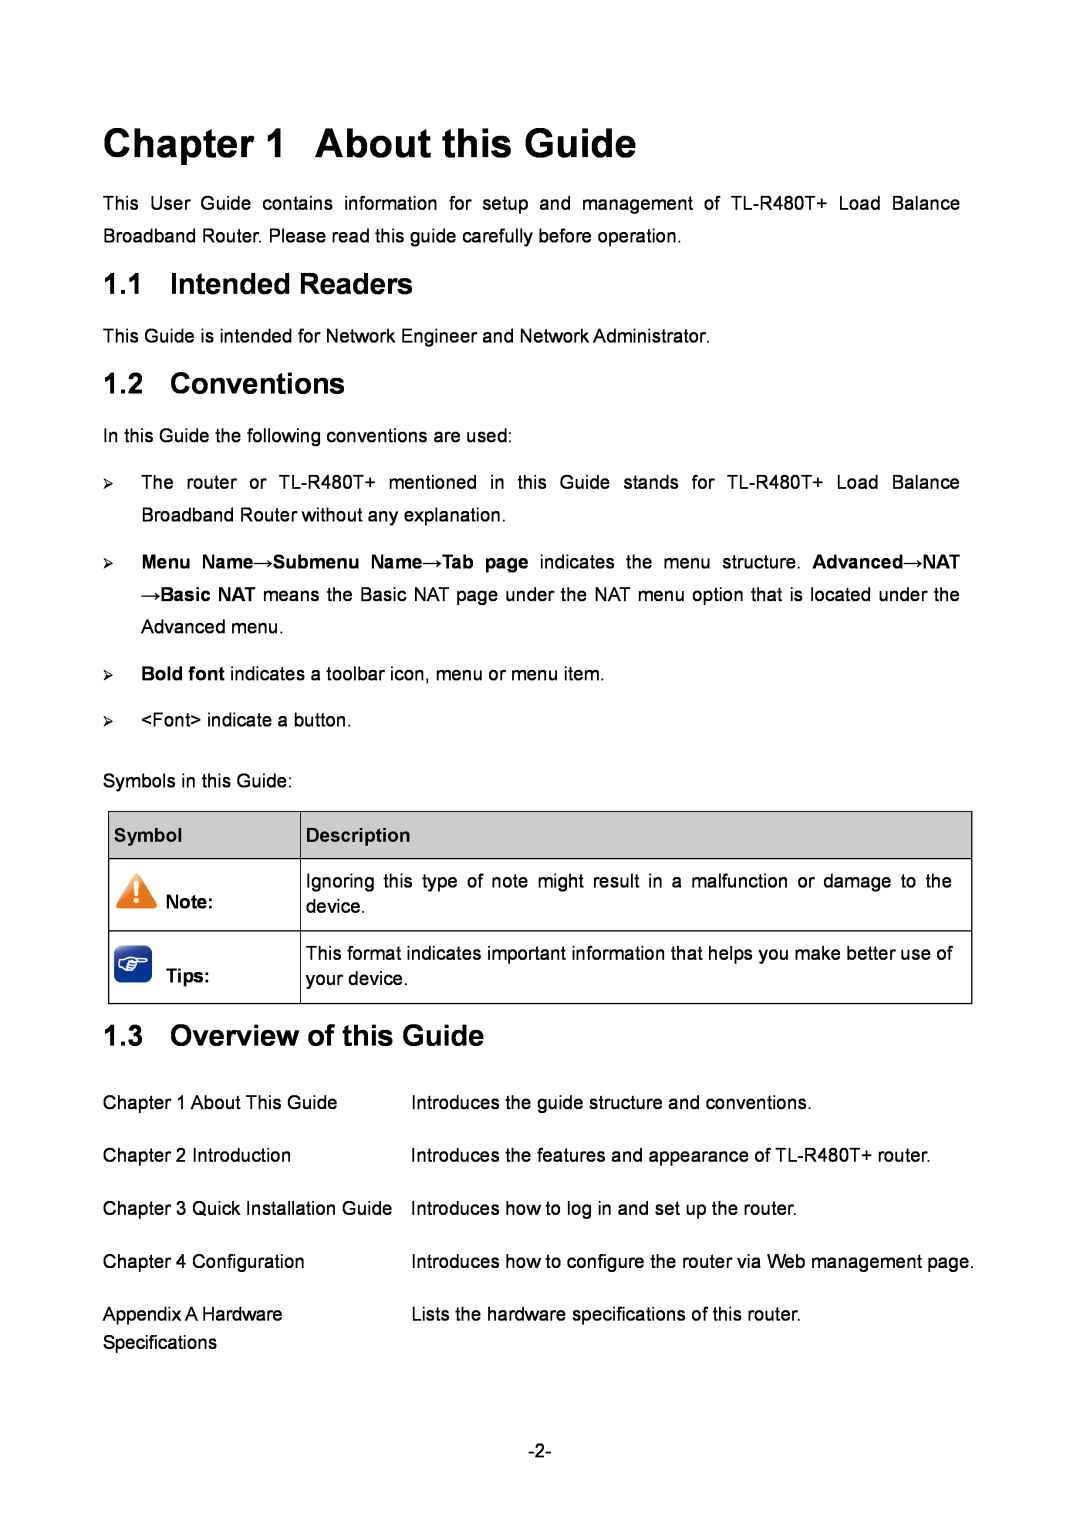 TP-Link 1910010933 About this Guide, Intended Readers, Conventions, Overview of this Guide, Symbol, Description, device 